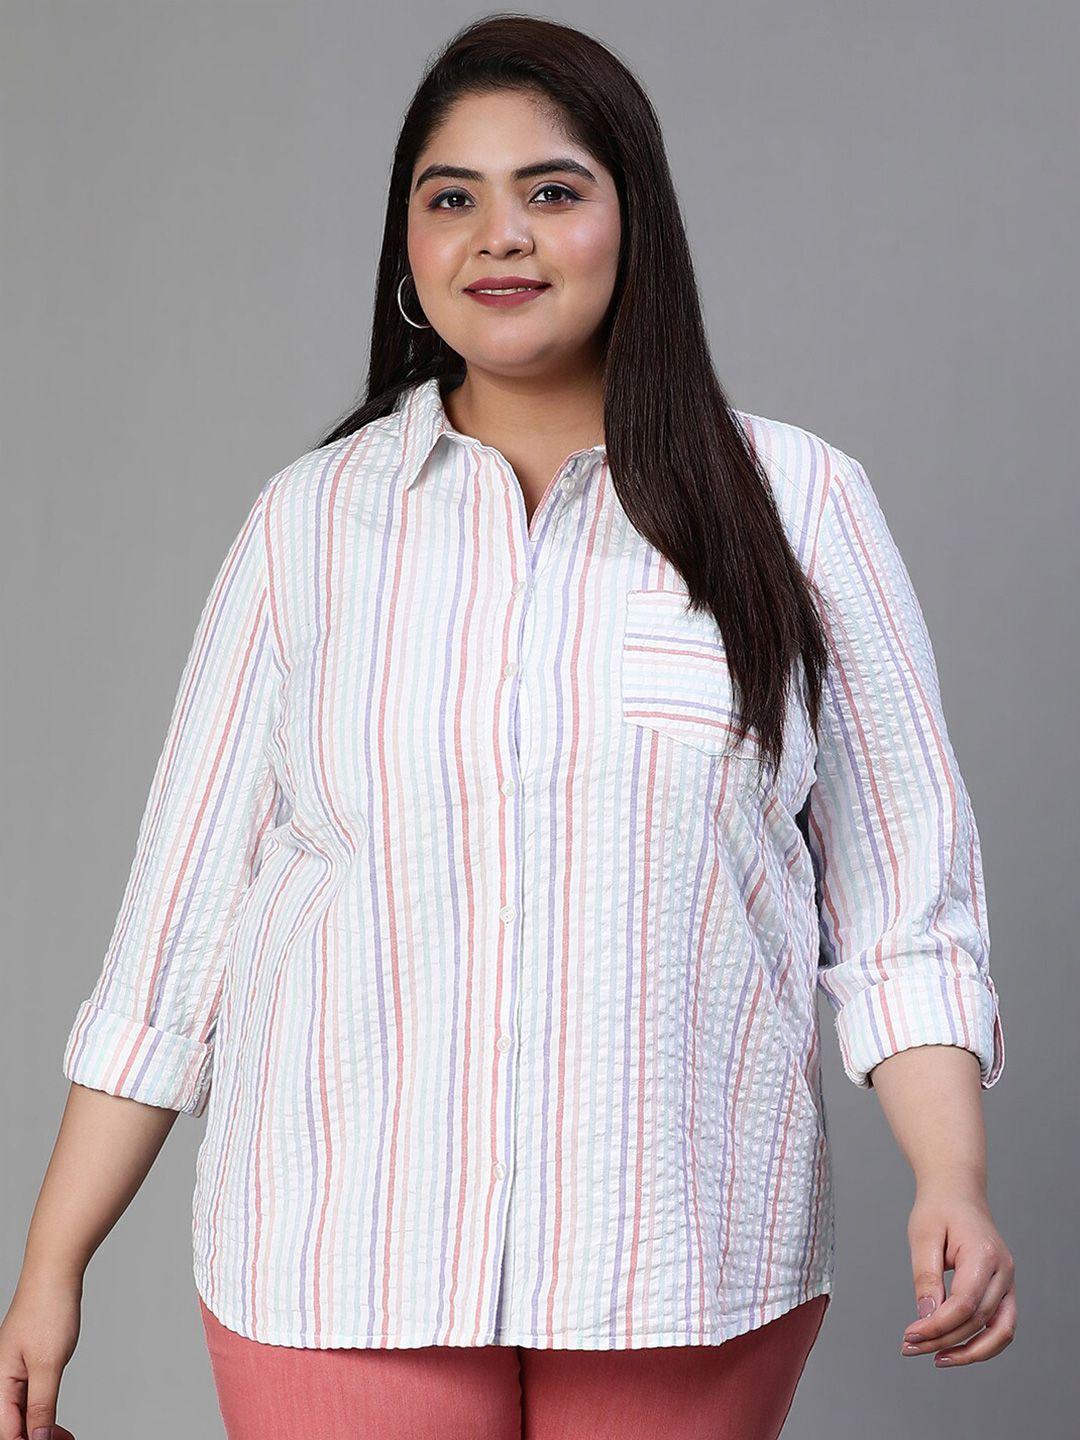 oxolloxo relaxed striped seersucker cotton casual shirt